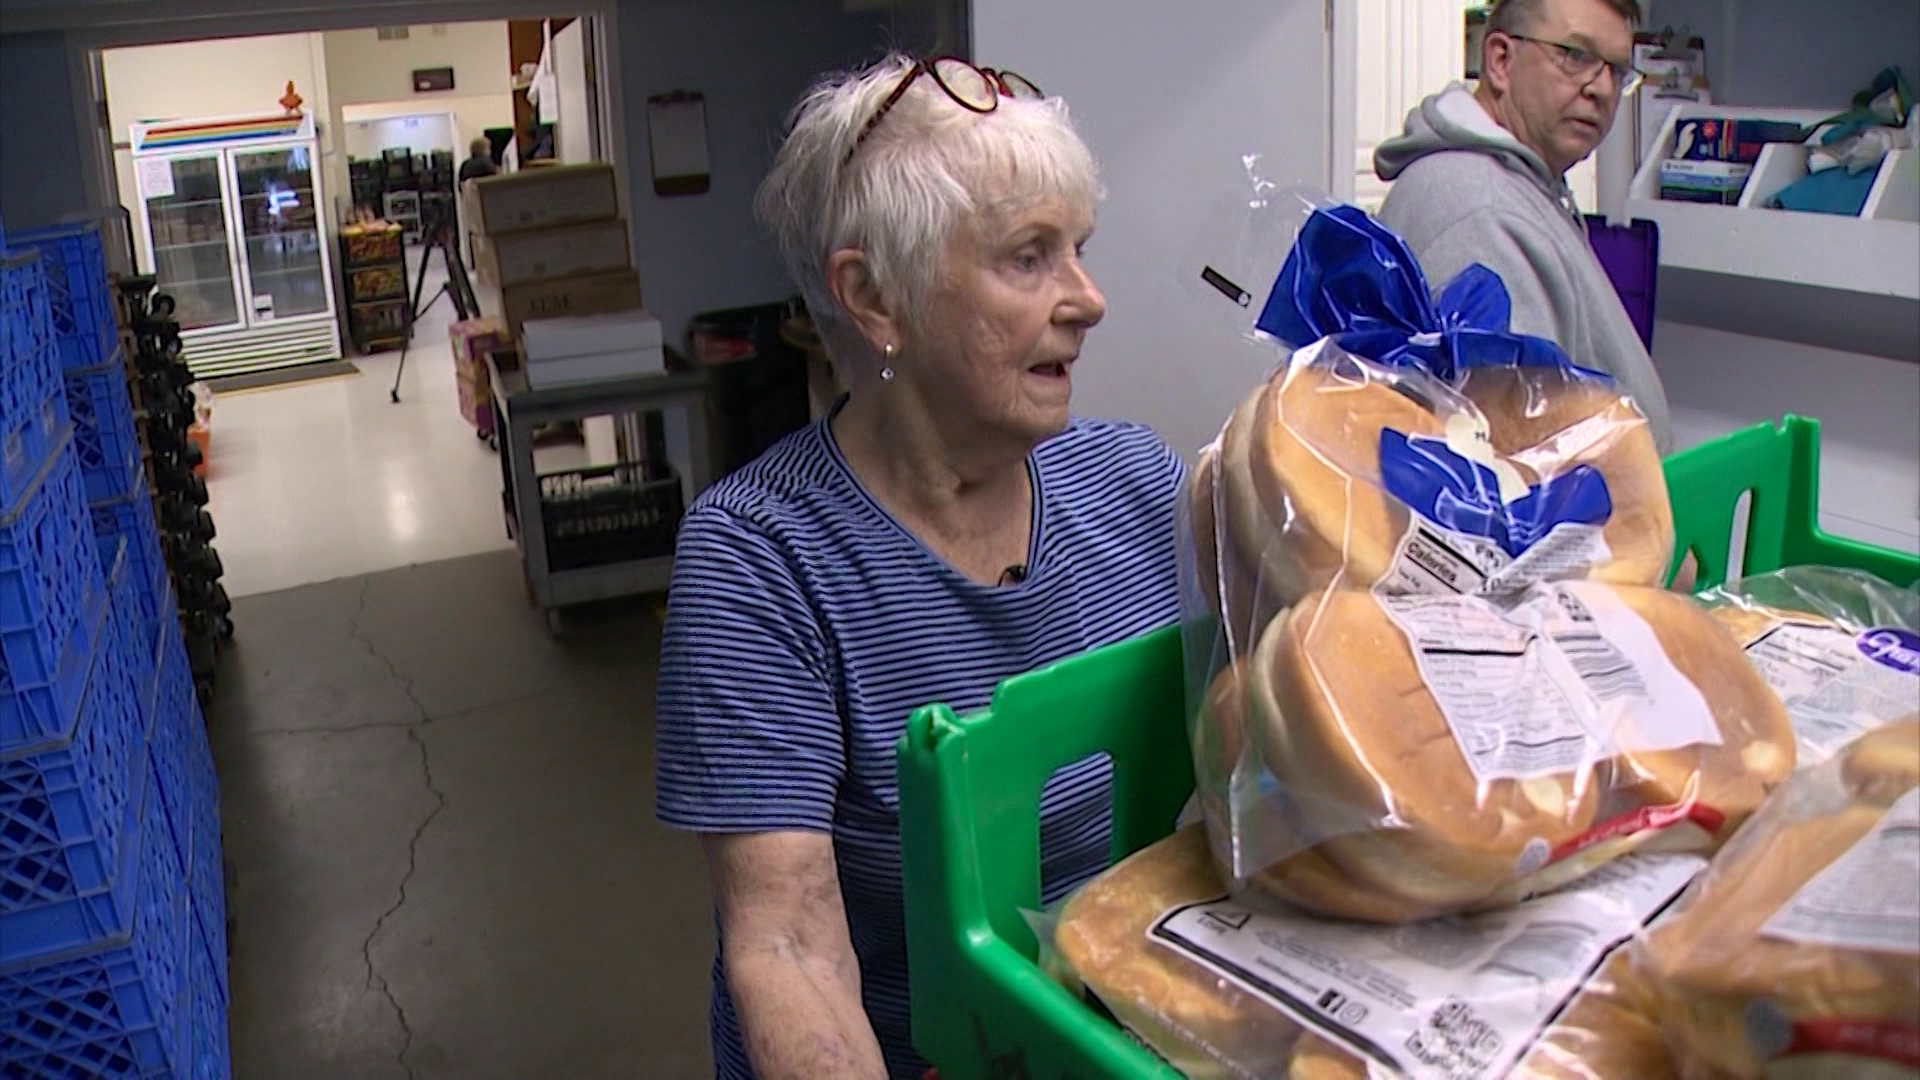 Anita Sundelin has been volunteering for the Snohomish Community Food Bank for the past four years.